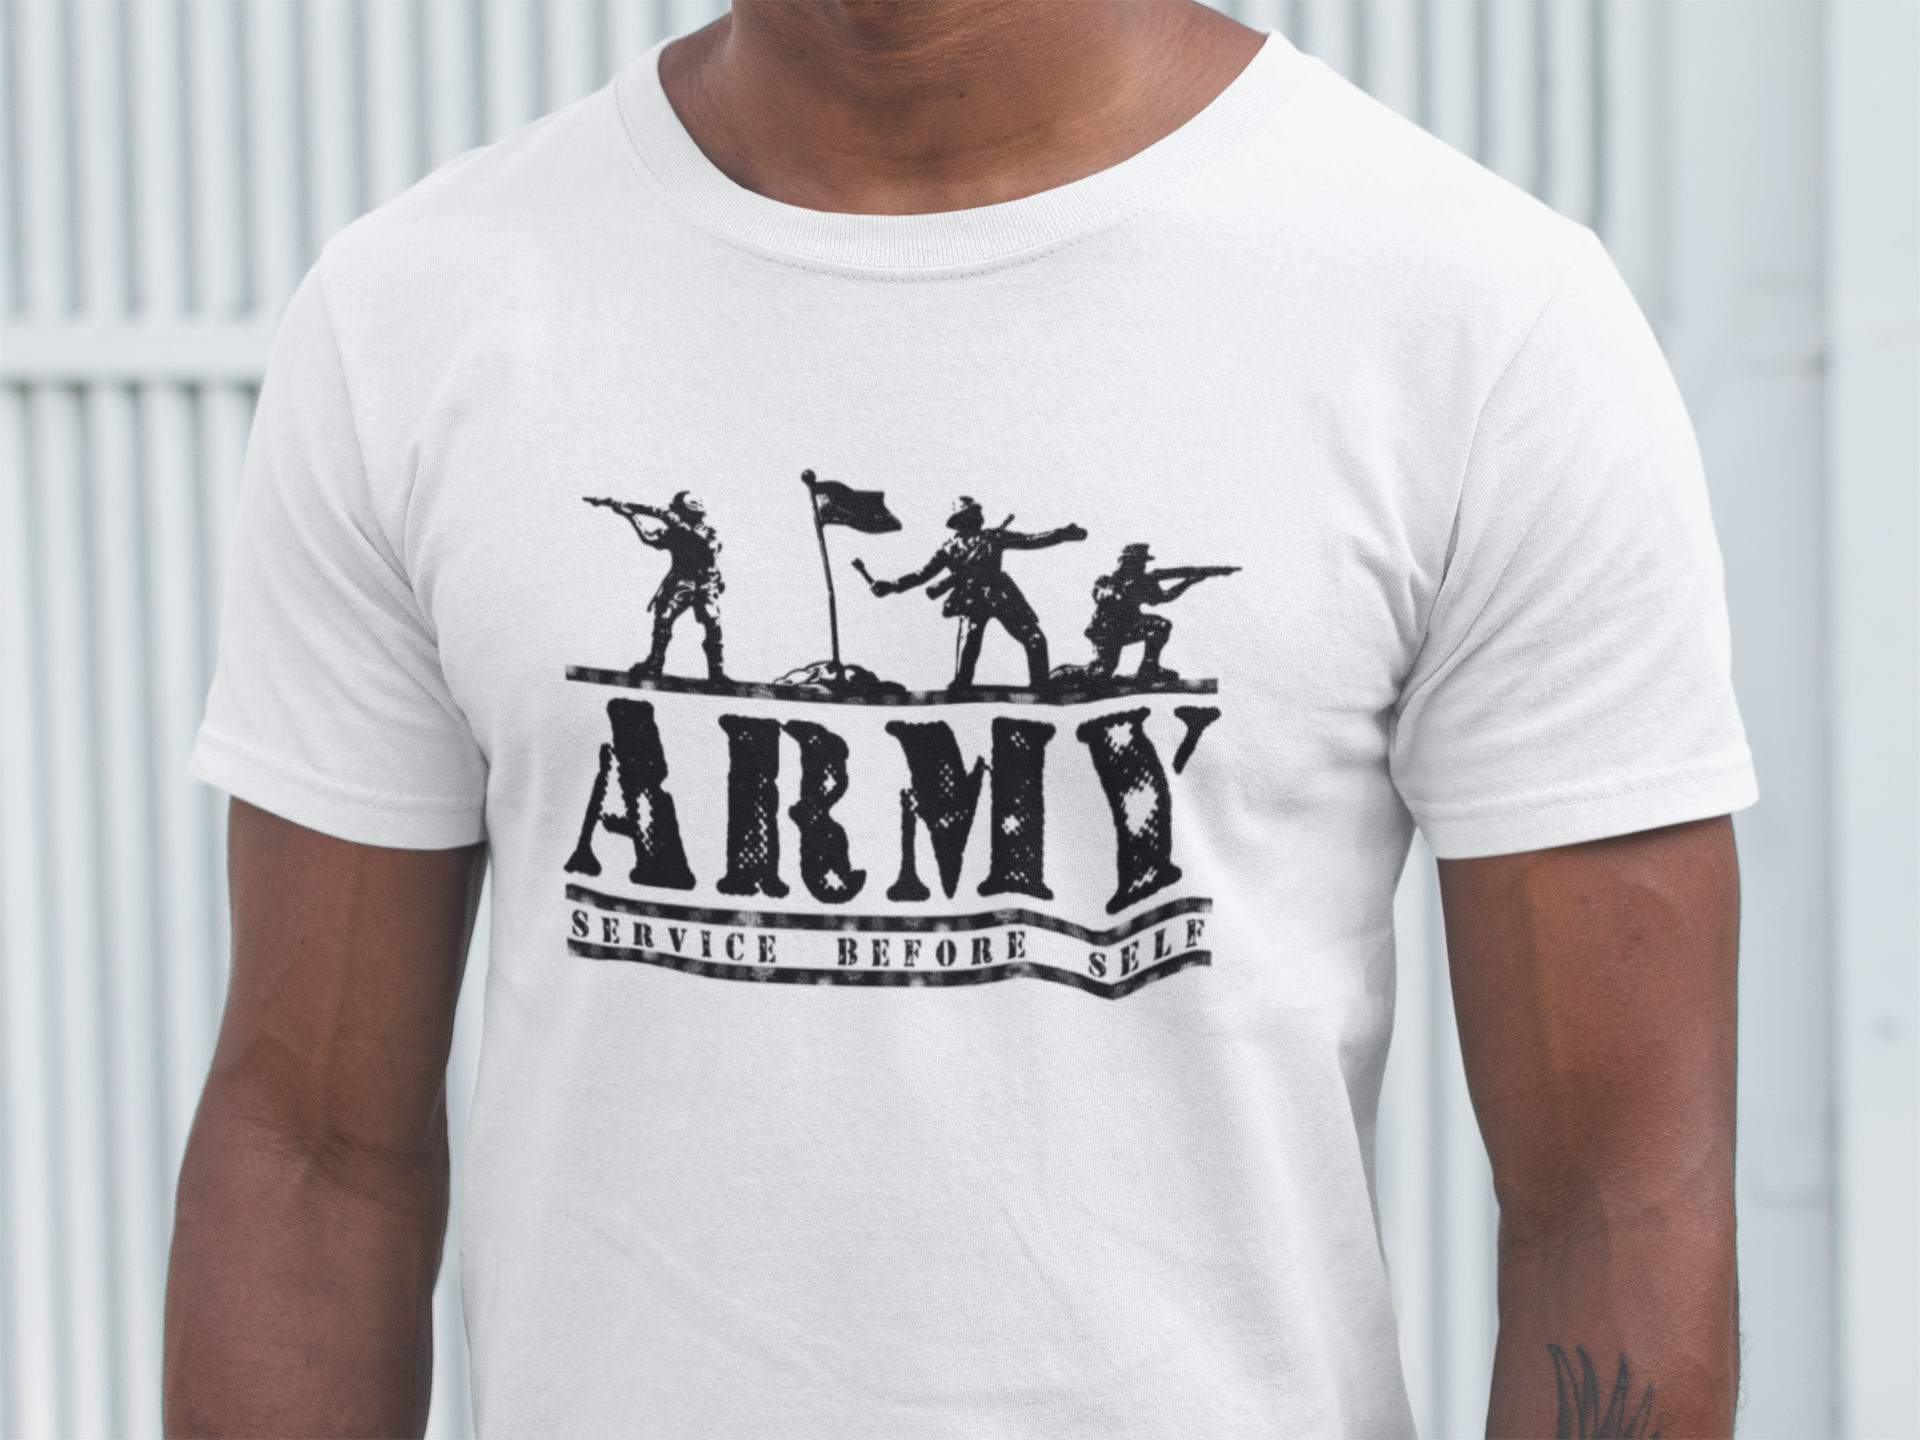 closeup-of-a-black-man-wearing-a-t-shirt-mockup-against-a-white-metal-door-a20903 (1).png